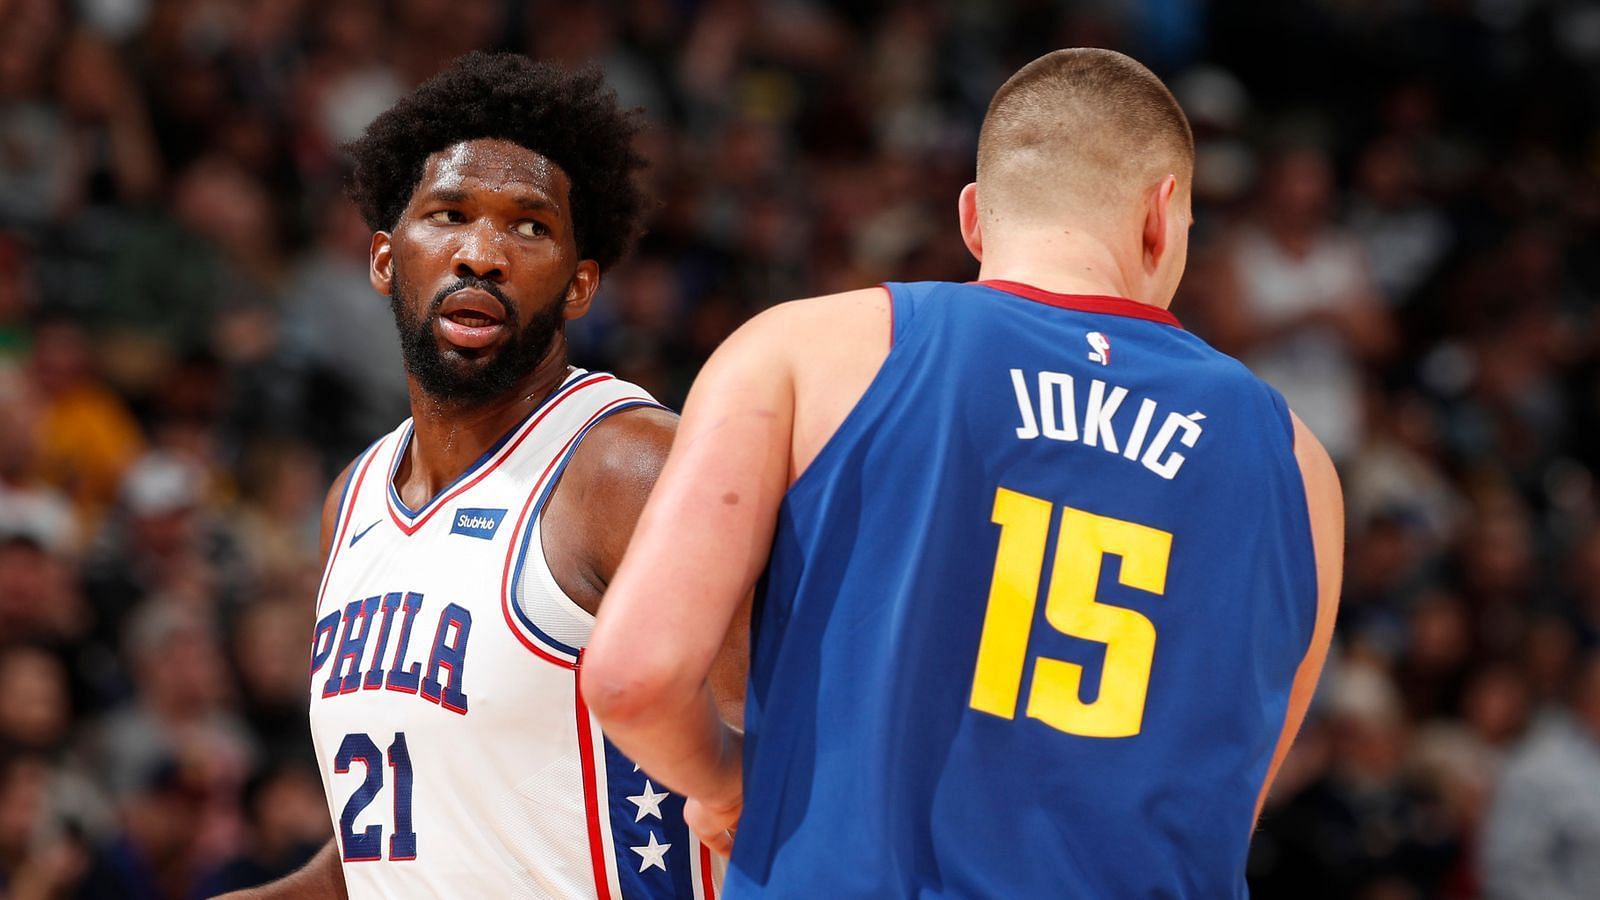 The Philadelphia 76ers will host the Denver Nuggets on Mar. 14. [Source: Sky Sports]